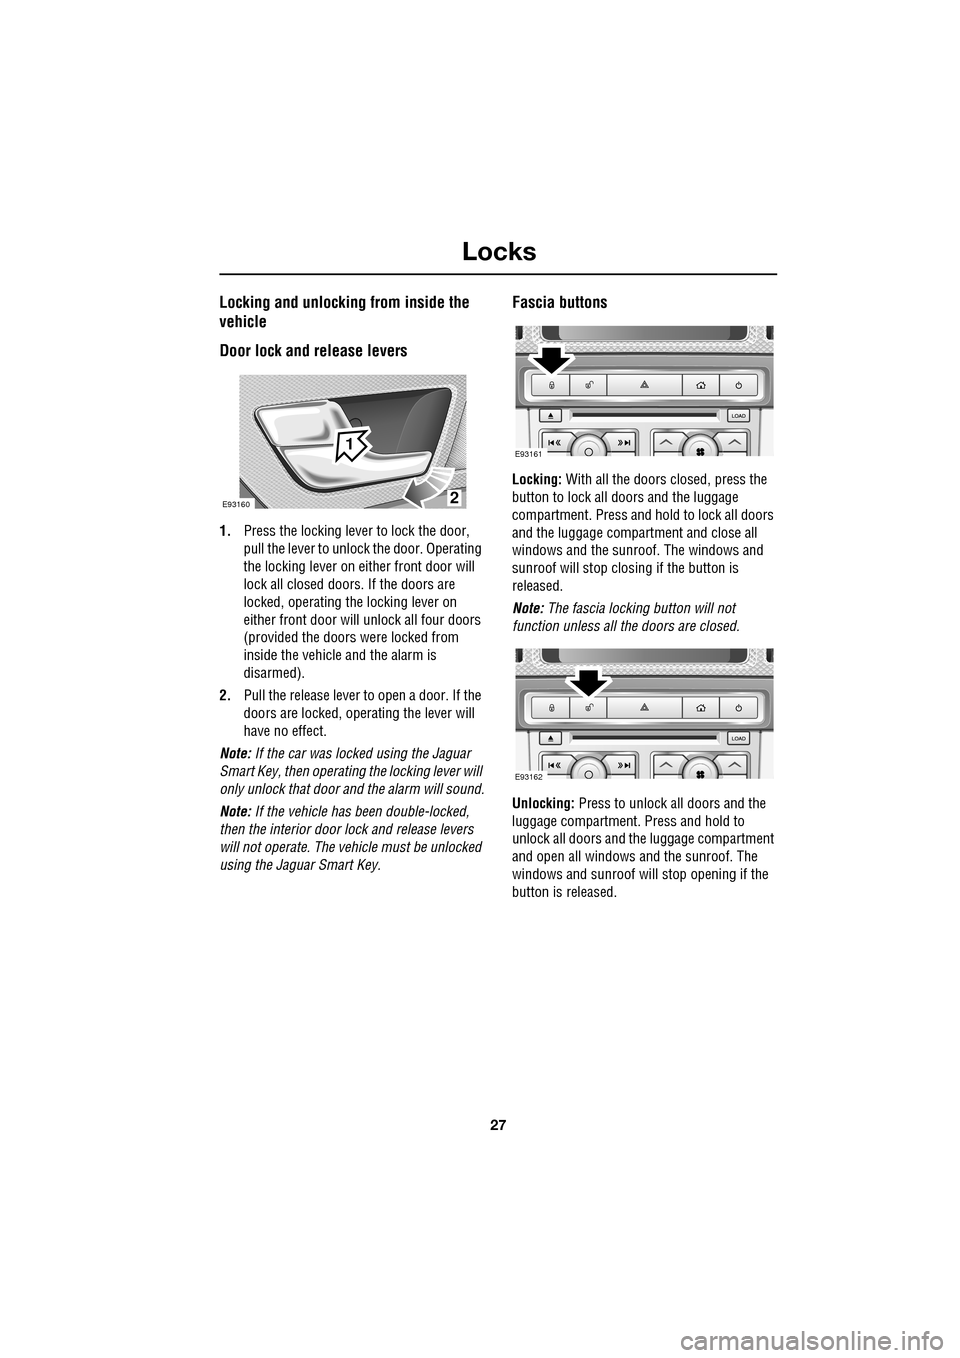 JAGUAR XF 2009 1.G Owners Manual 27
Locks
               
Locking and unlocking from inside the 
vehicle
Door lock and release levers
1.Press the locking lever to lock the door, 
pull the lever to unlock the door. Operating 
the lock